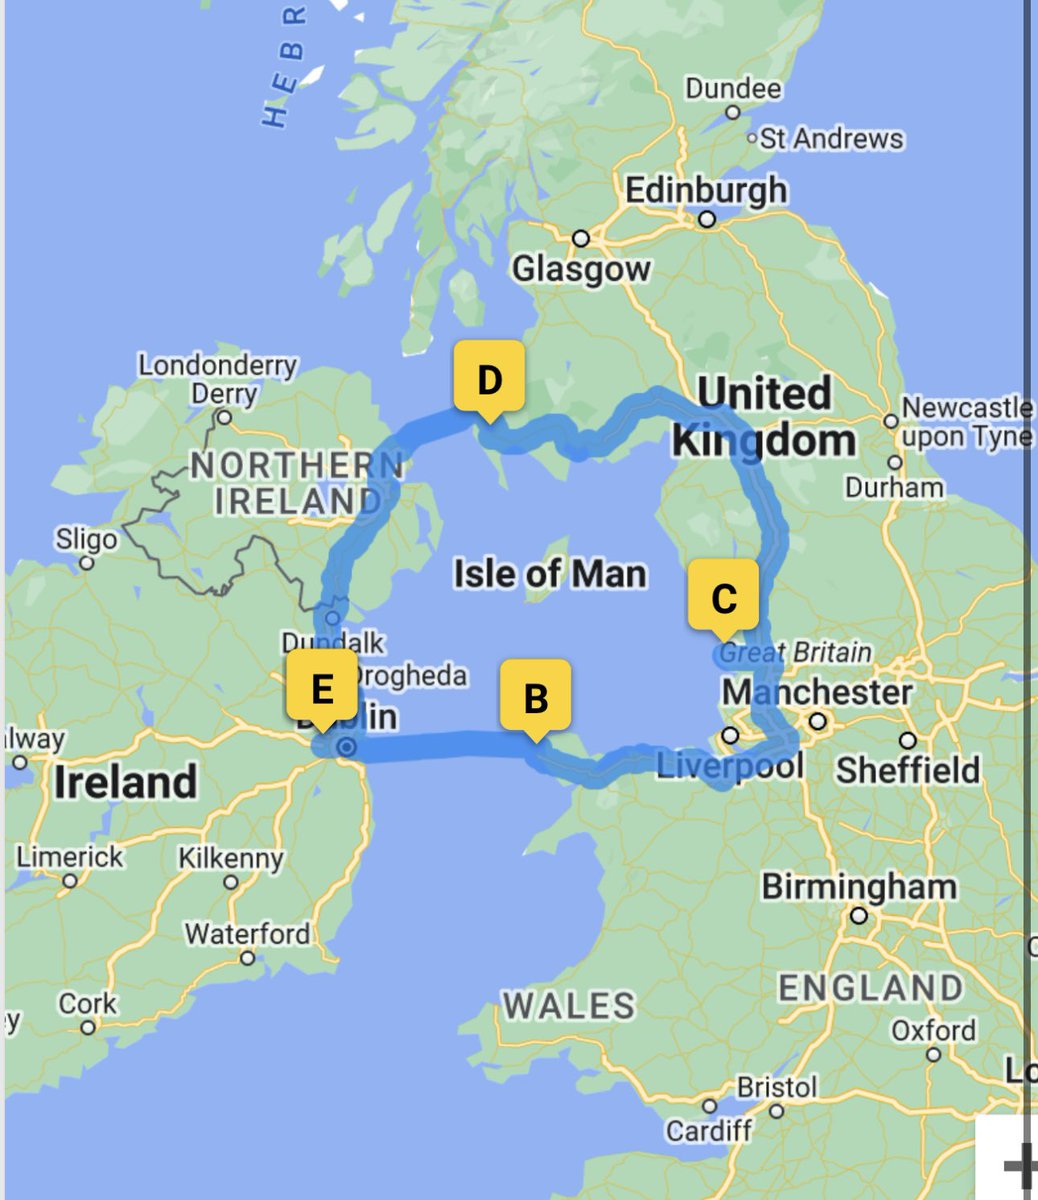 Impromptu Motorcycle road trip planned over the next 3 days, any recommendations places to go in North Wales , North East England coast , Lake District or Dumfries and Galloway greatly appreciated #roadtrip #motorbike #VisitWales #VisitEngland #VisitScotland #VisitNorthernIreland…